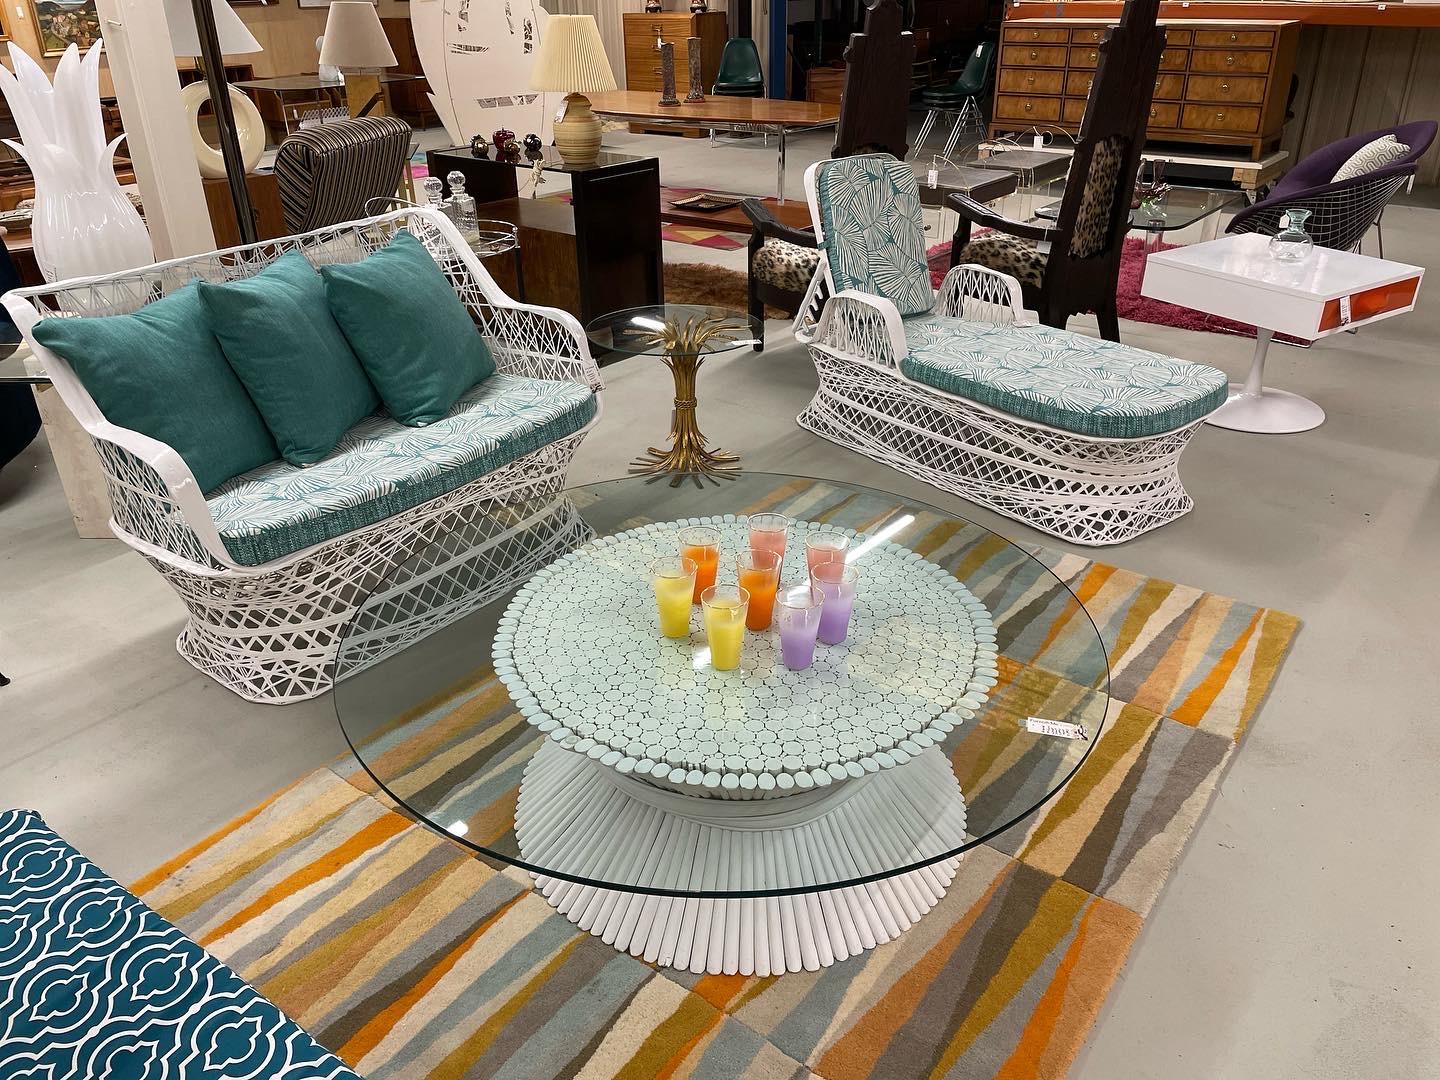 McGuire Coastal White Rattan Wheat Sheaf Coffee Table with Round Glass In Good Condition For Sale In Chattanooga, TN